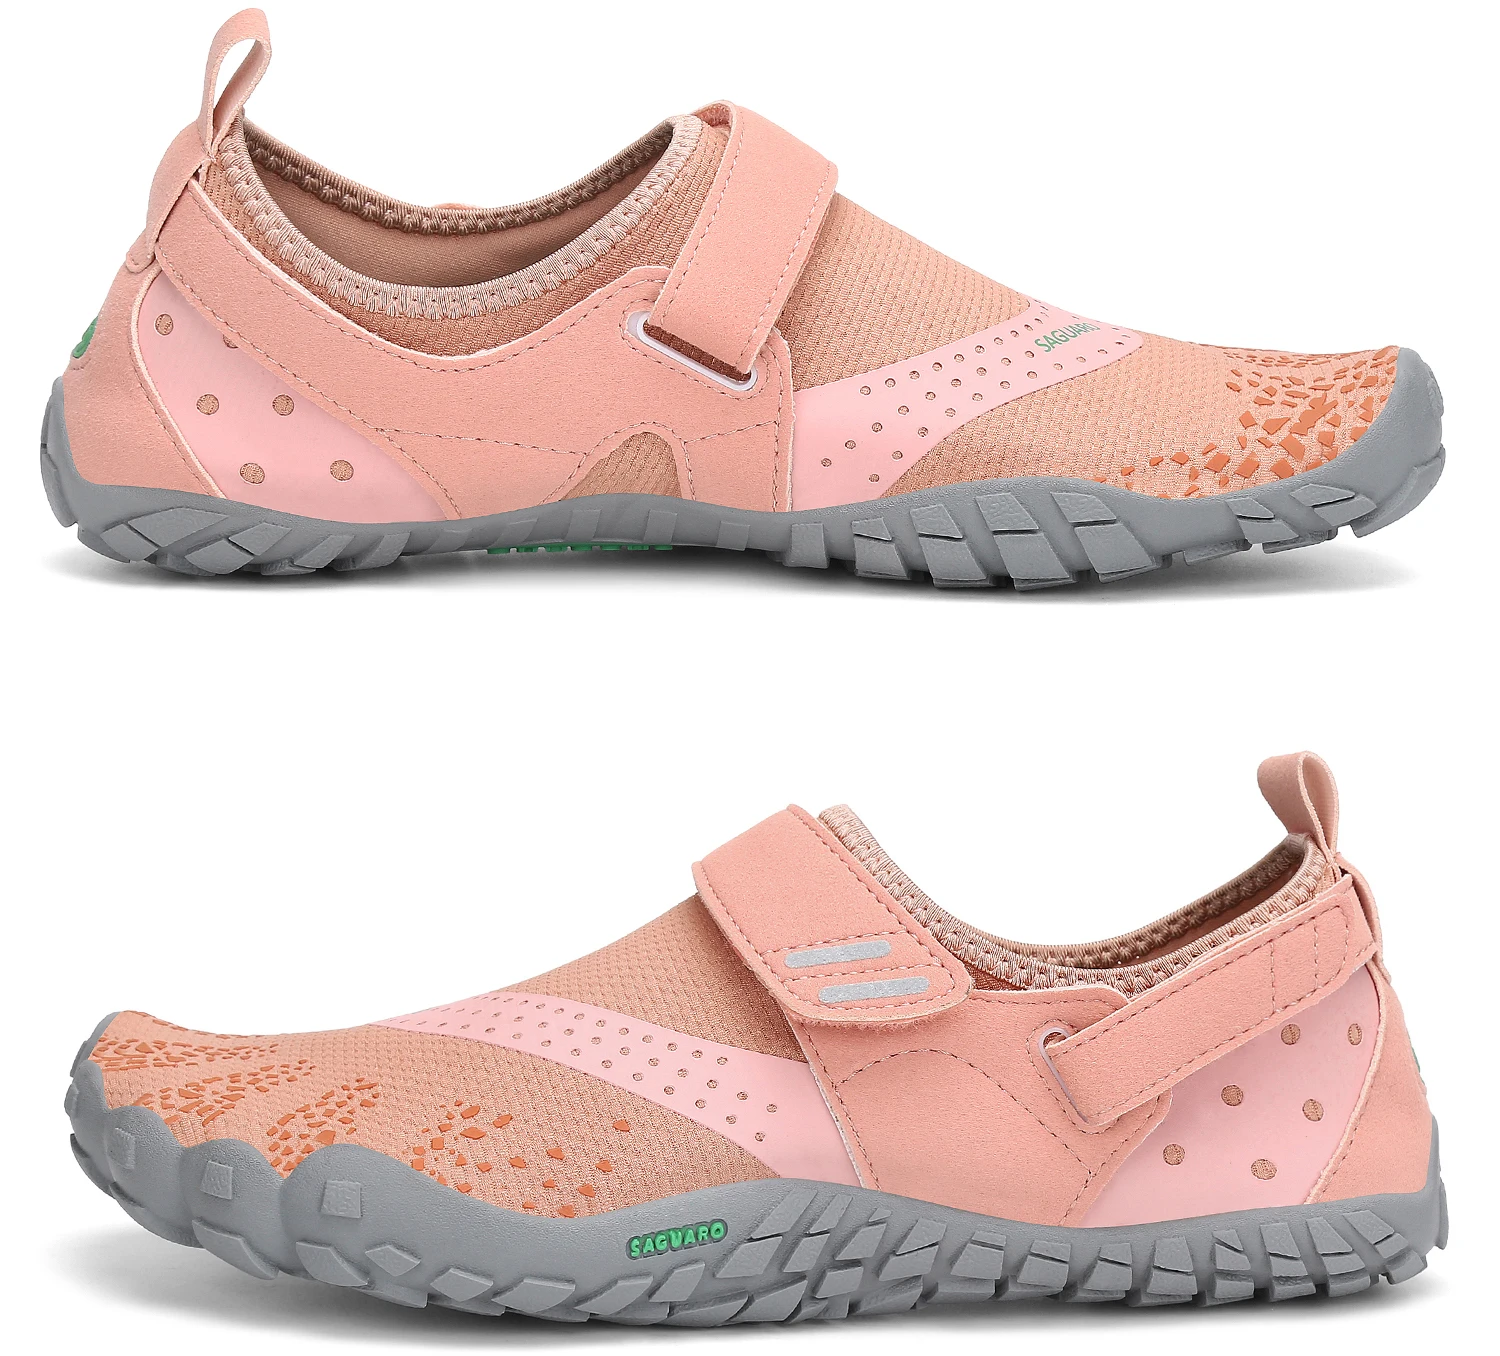 

Rubber Soft Sole Breathable Mesh Elastic Upper Wear-resistant Big Size Five Toe Barefoot Shoes, Customized color